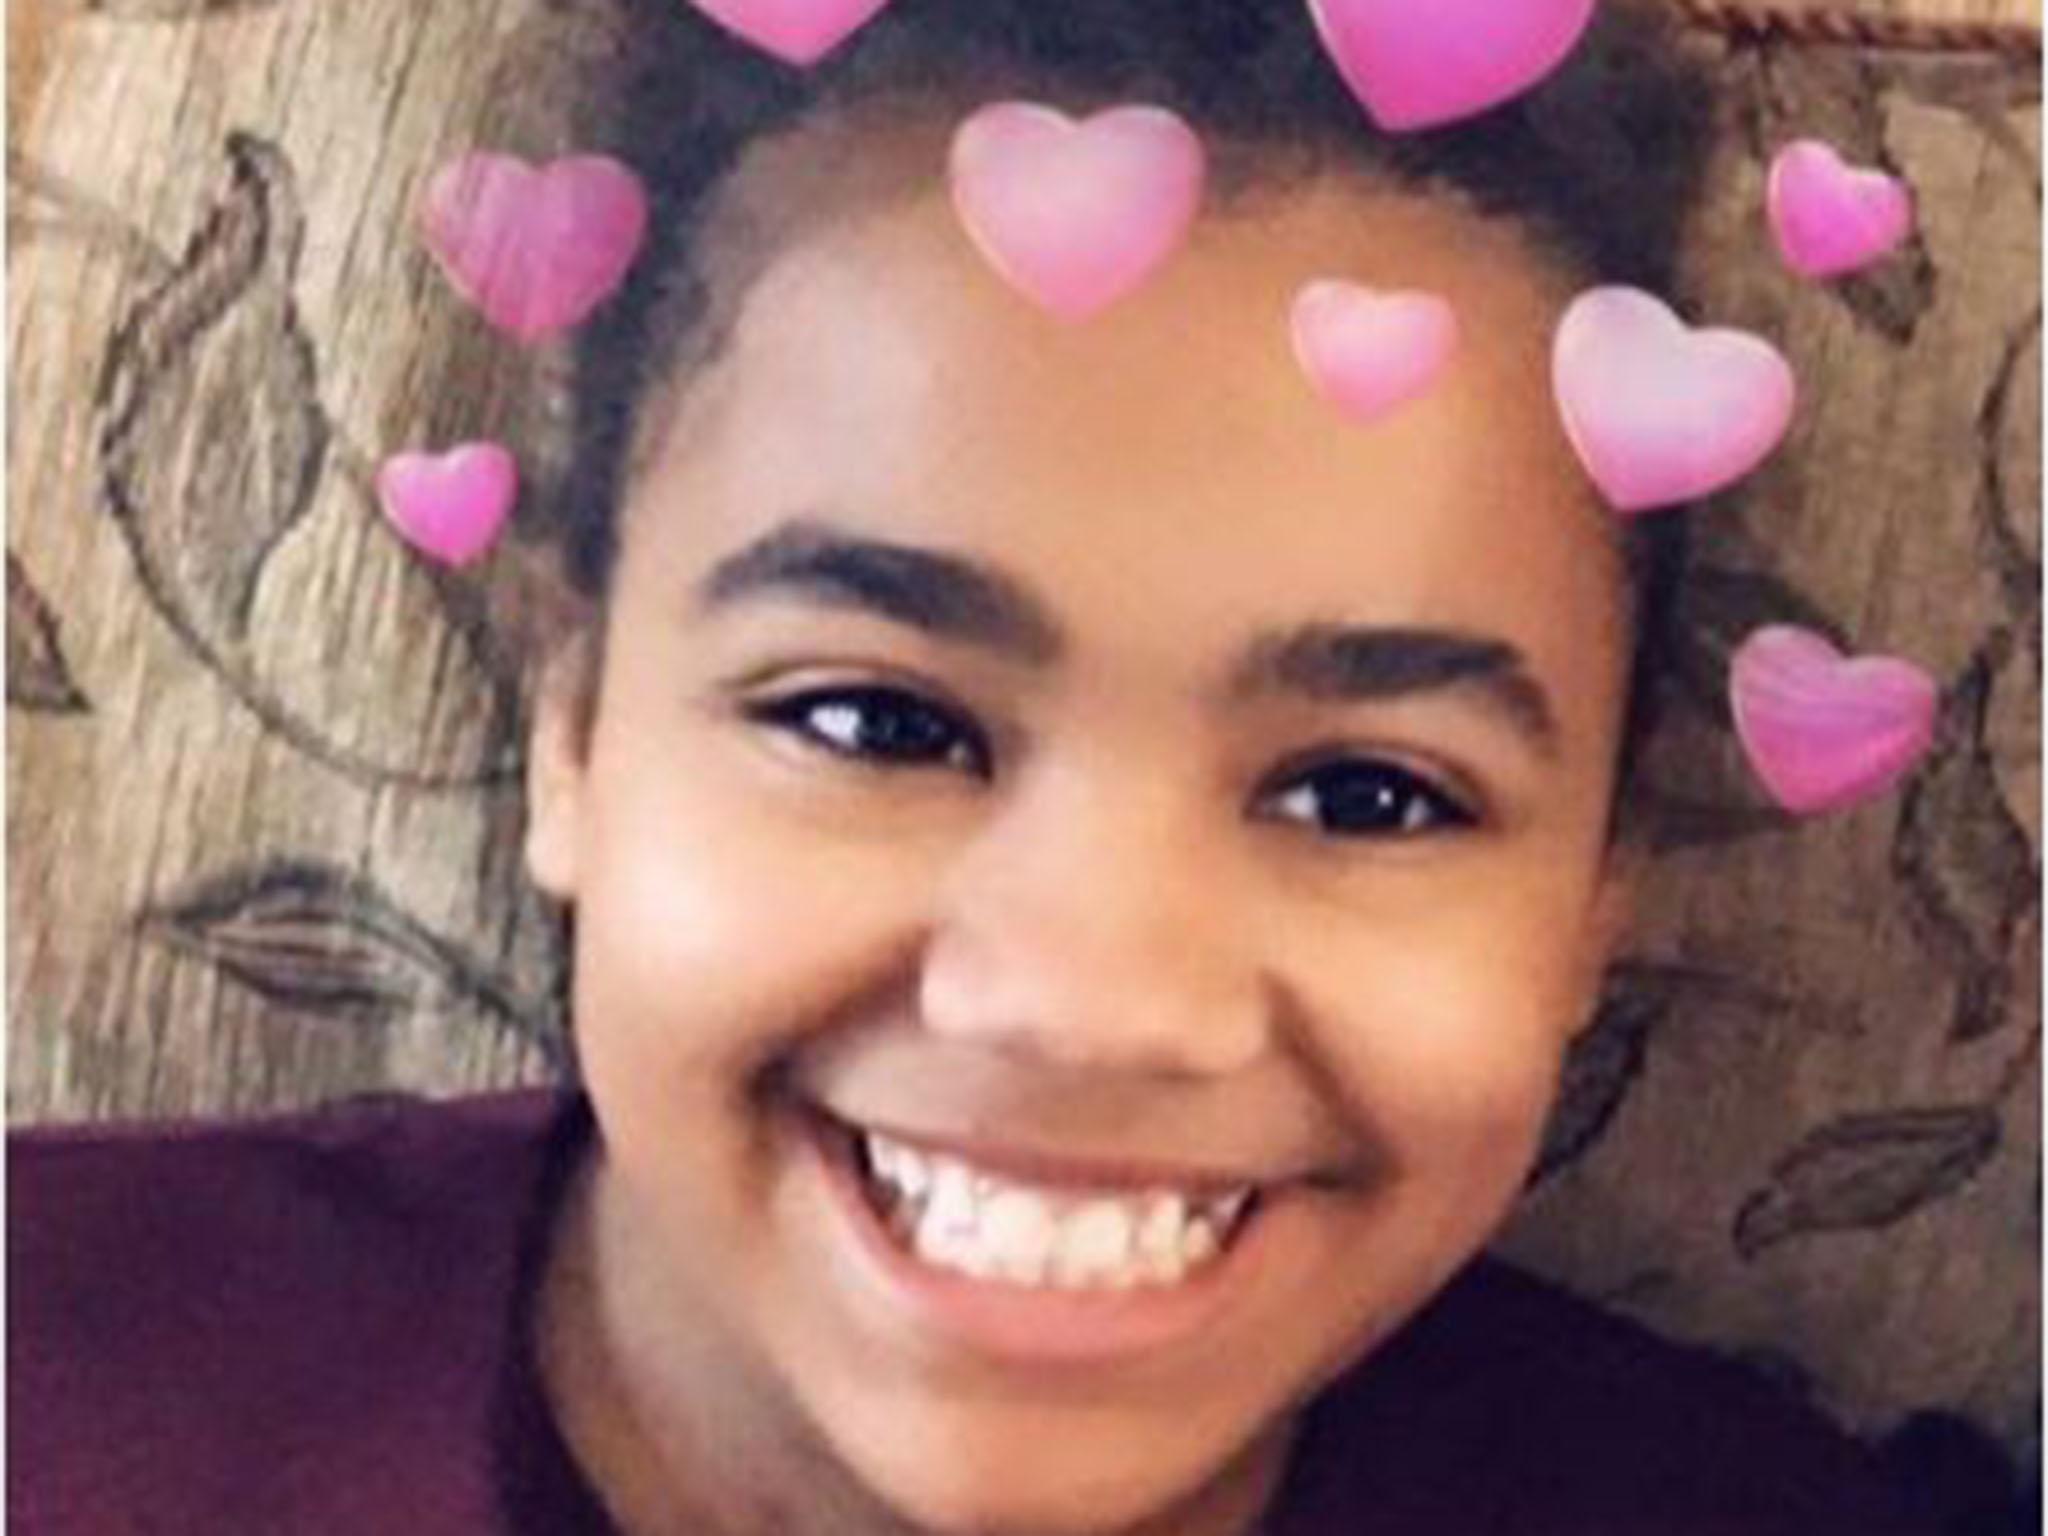 11-year old Jasmine died after being found with multiple injuries